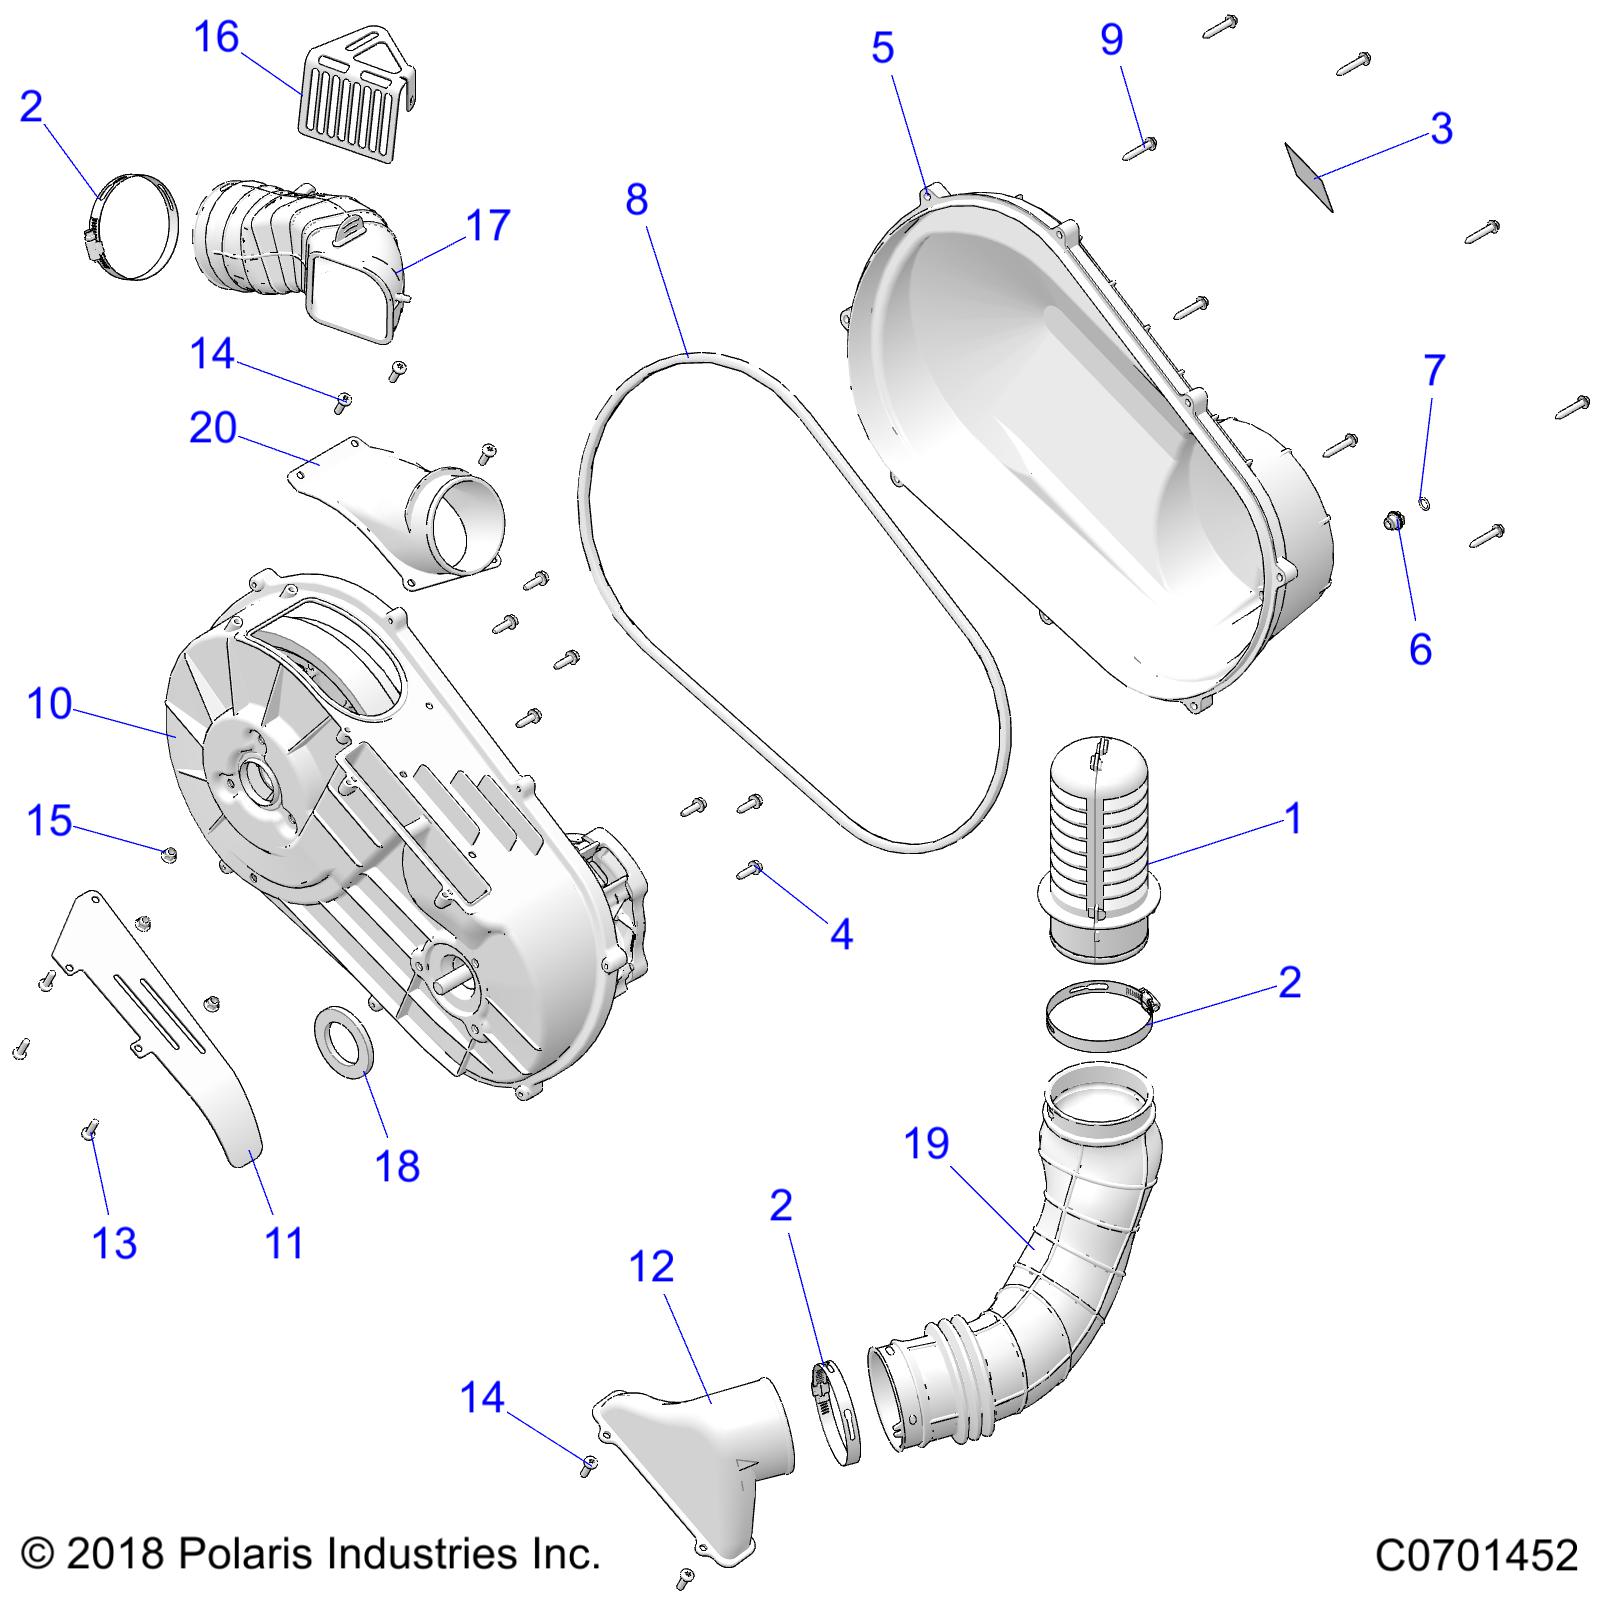 Part Number : 2634863 INNER CLUTCH COVER ASSEMBLY